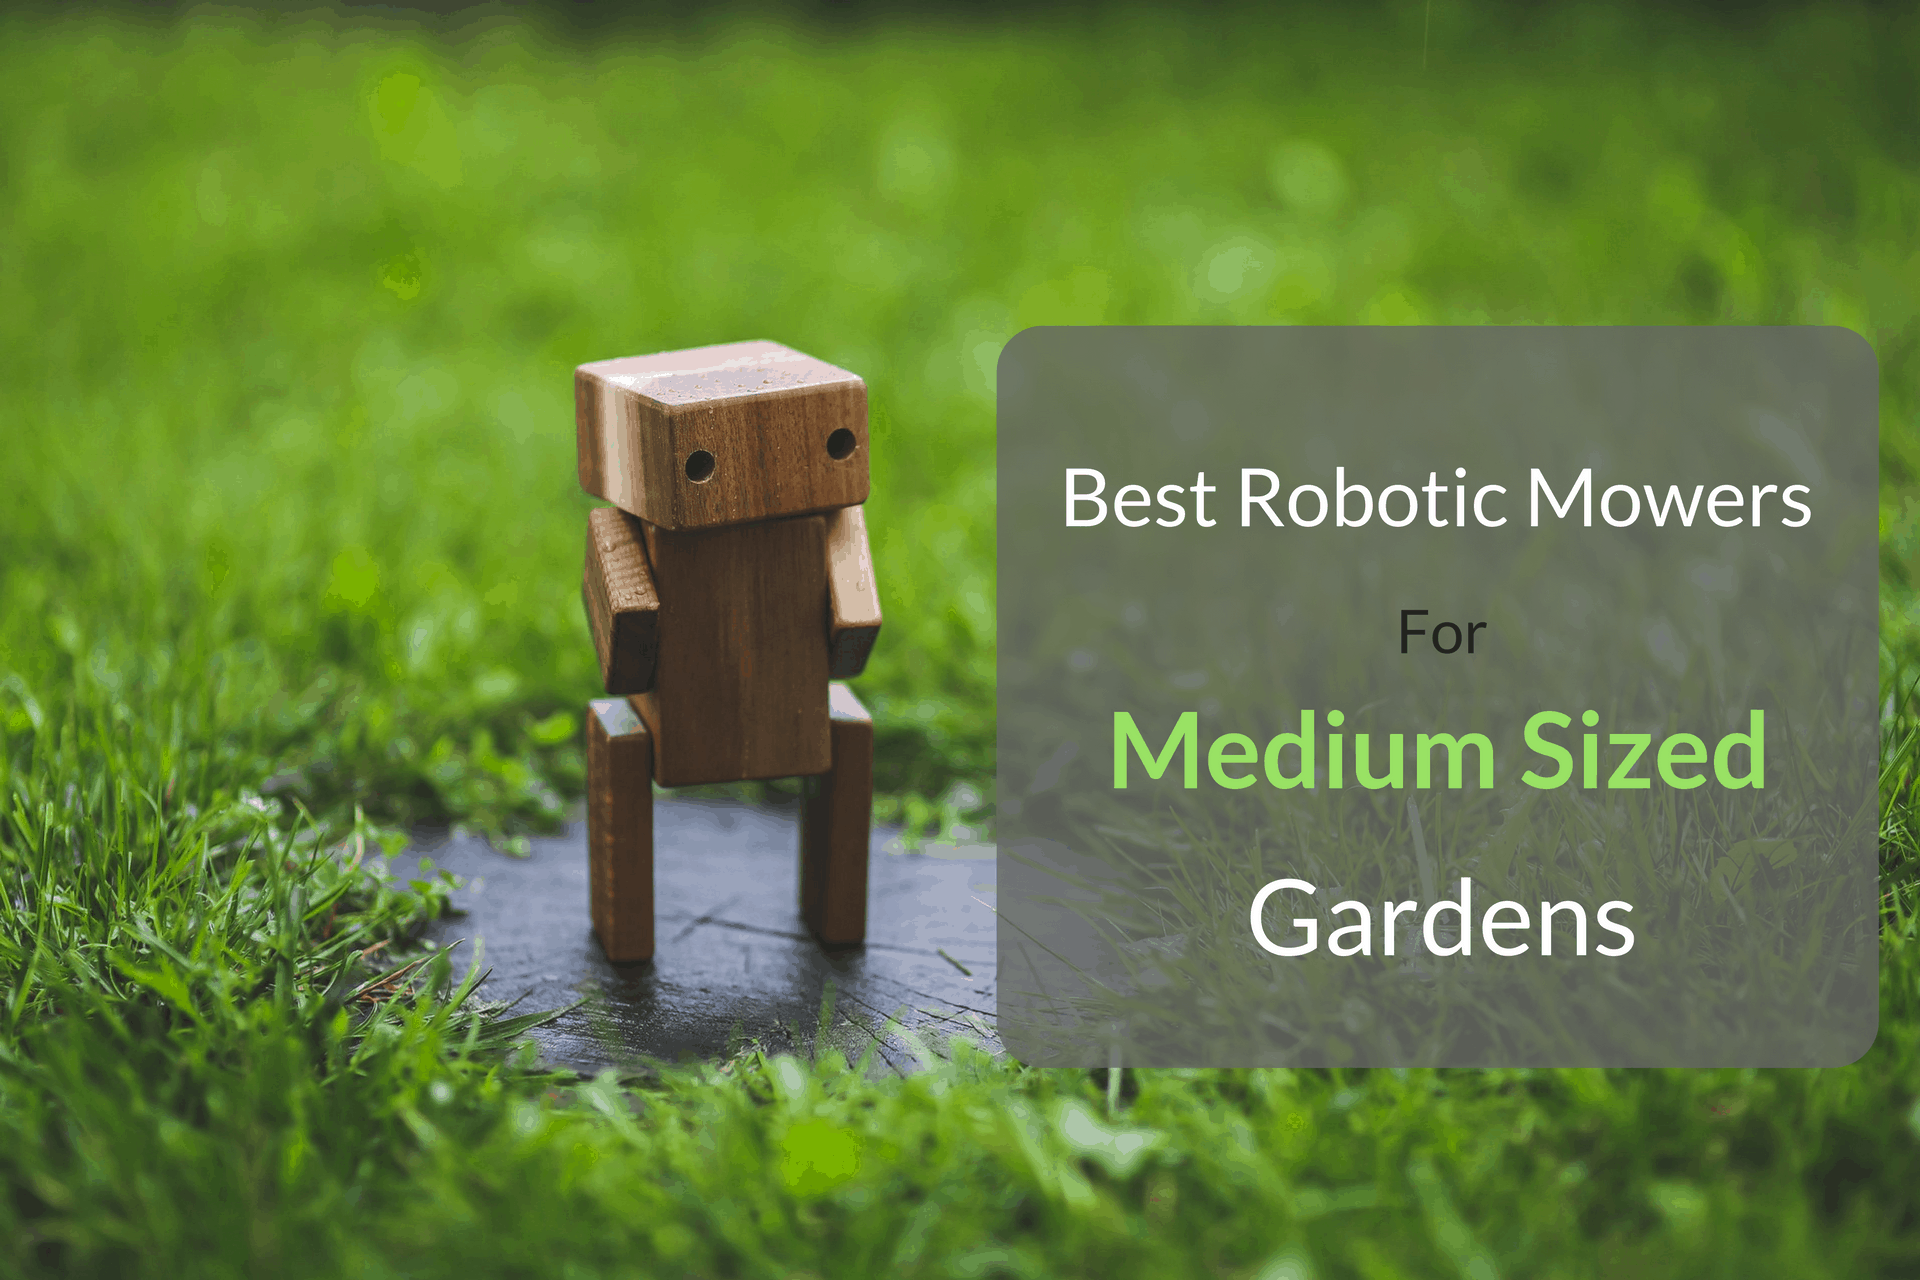 The Best Robotic Mowers For Medium Sized Yards